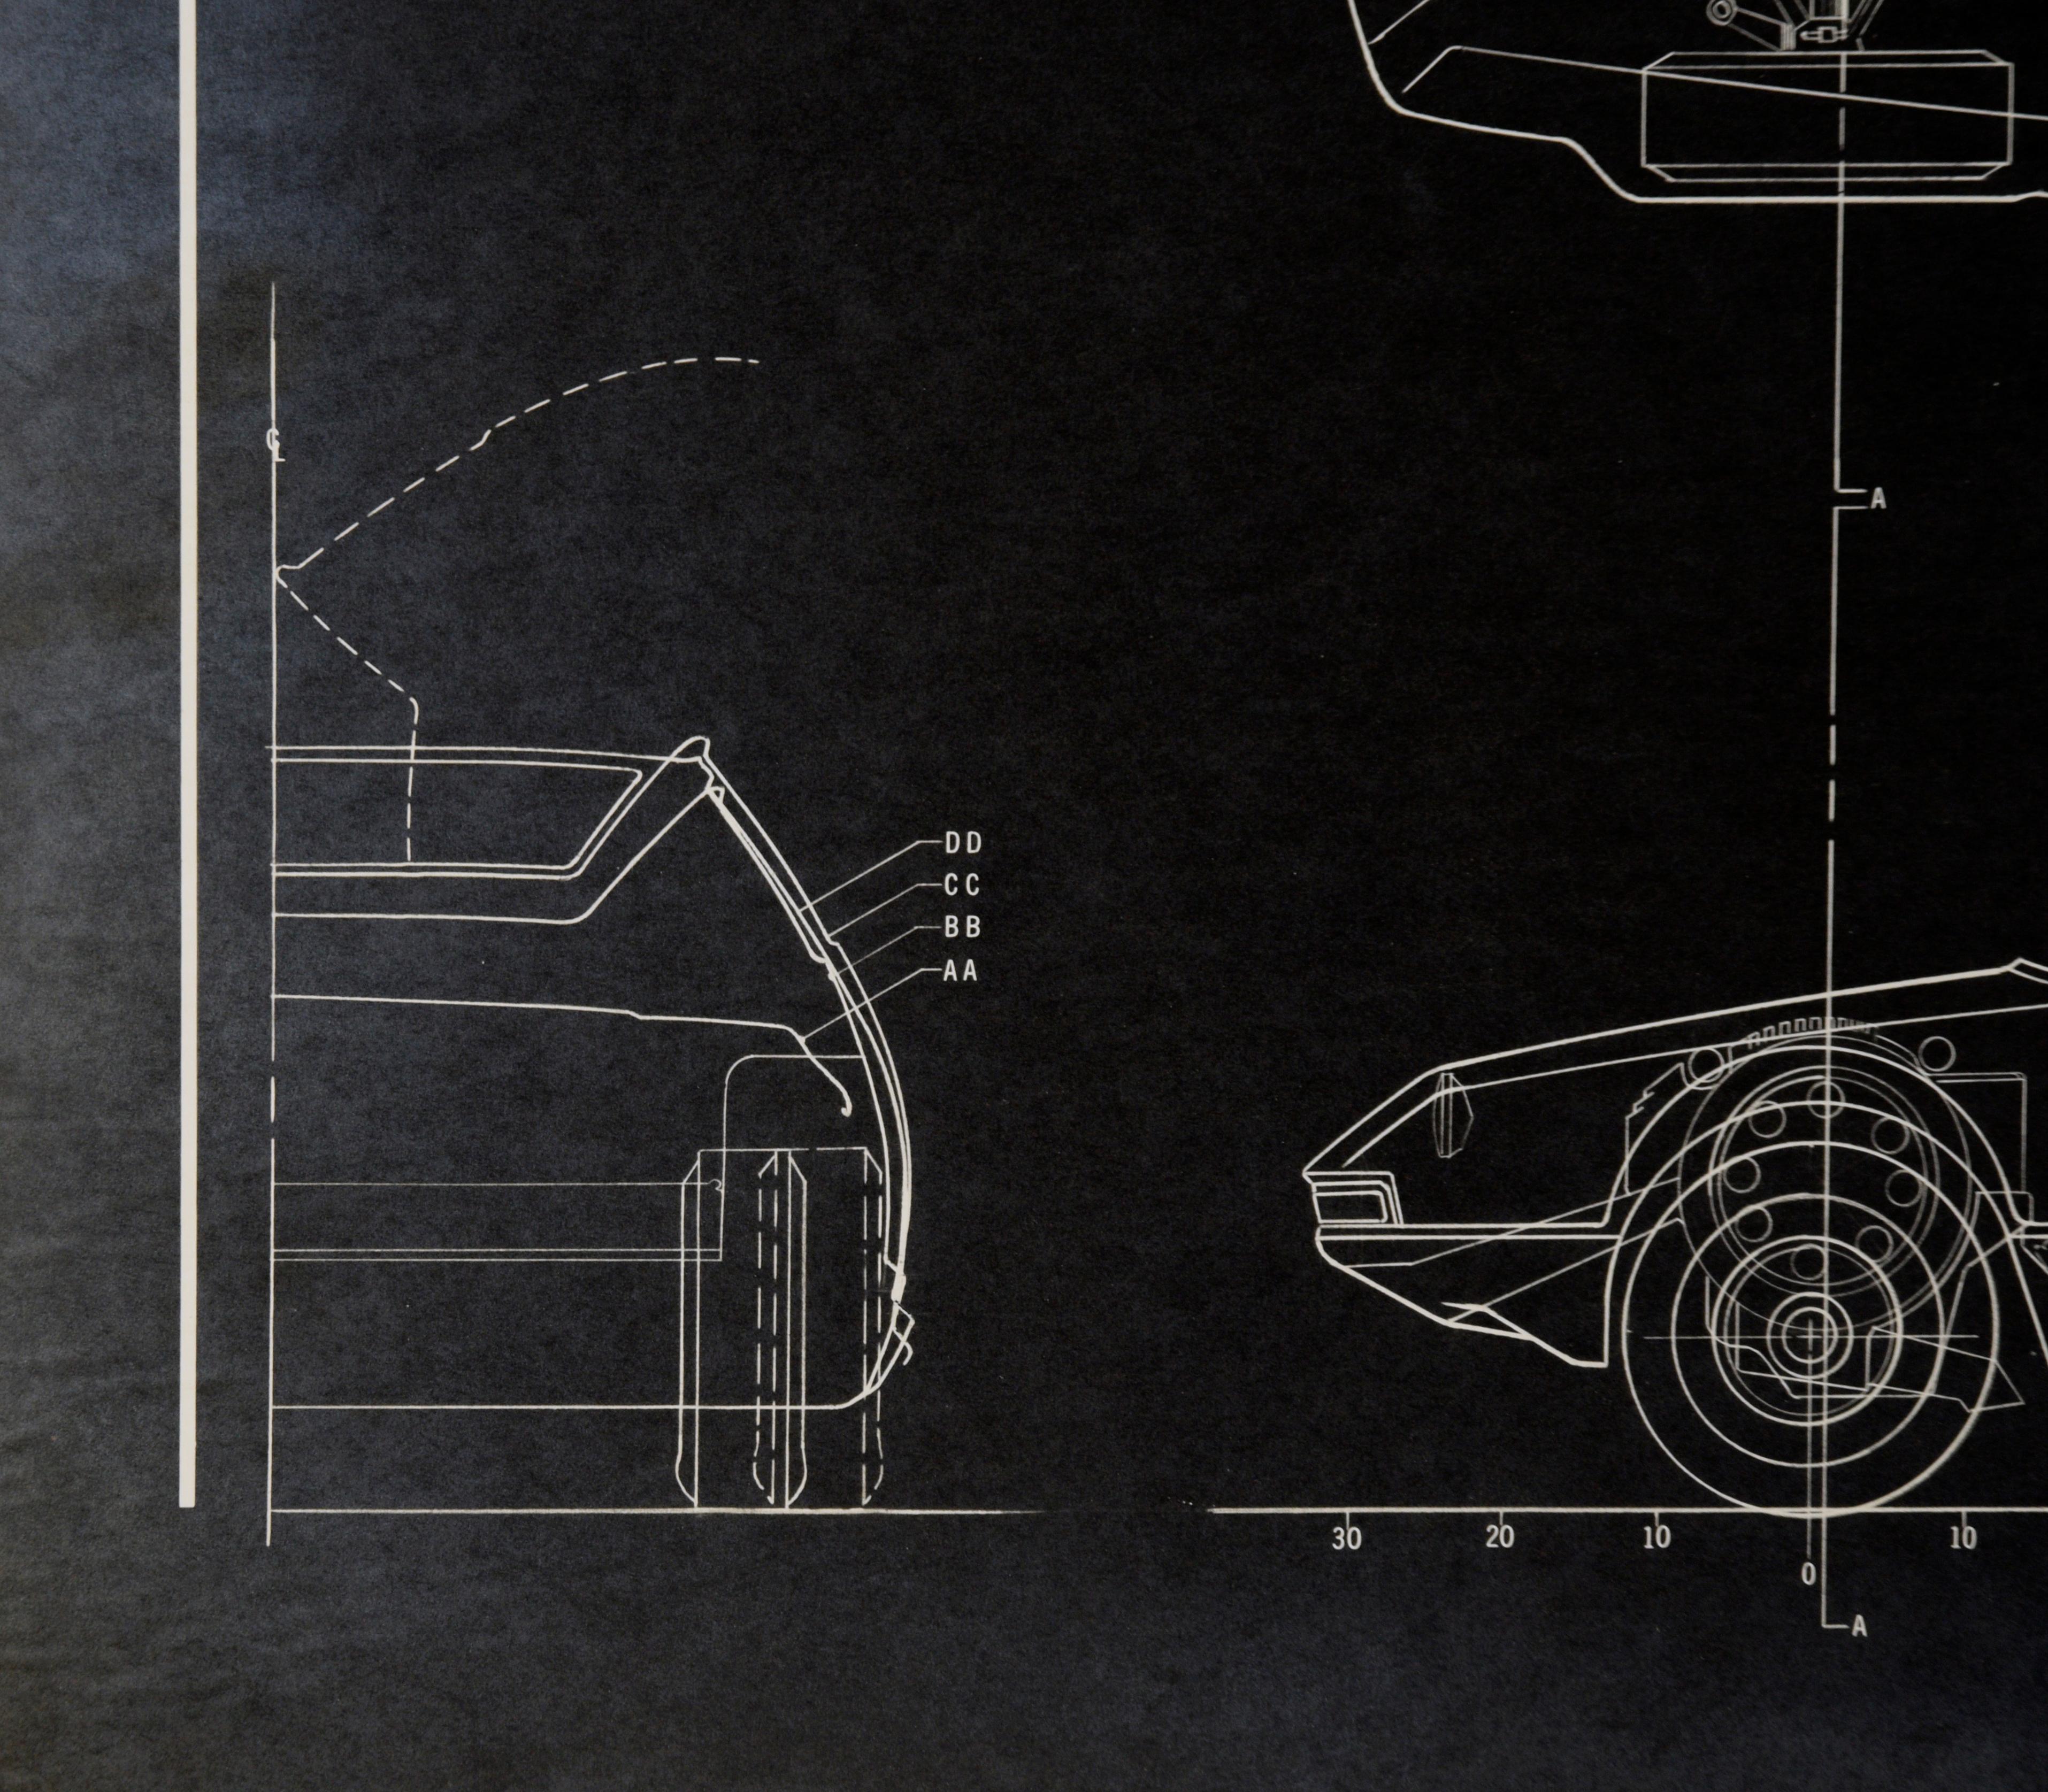 Design-quality blueprint of a concept vehicle by Edward T. Liljenwall (American, 1943-2010). Top and side views are highlighted, with a partial rear view to the left hand side. The vehicle is shown as having space for a person to lay down in the